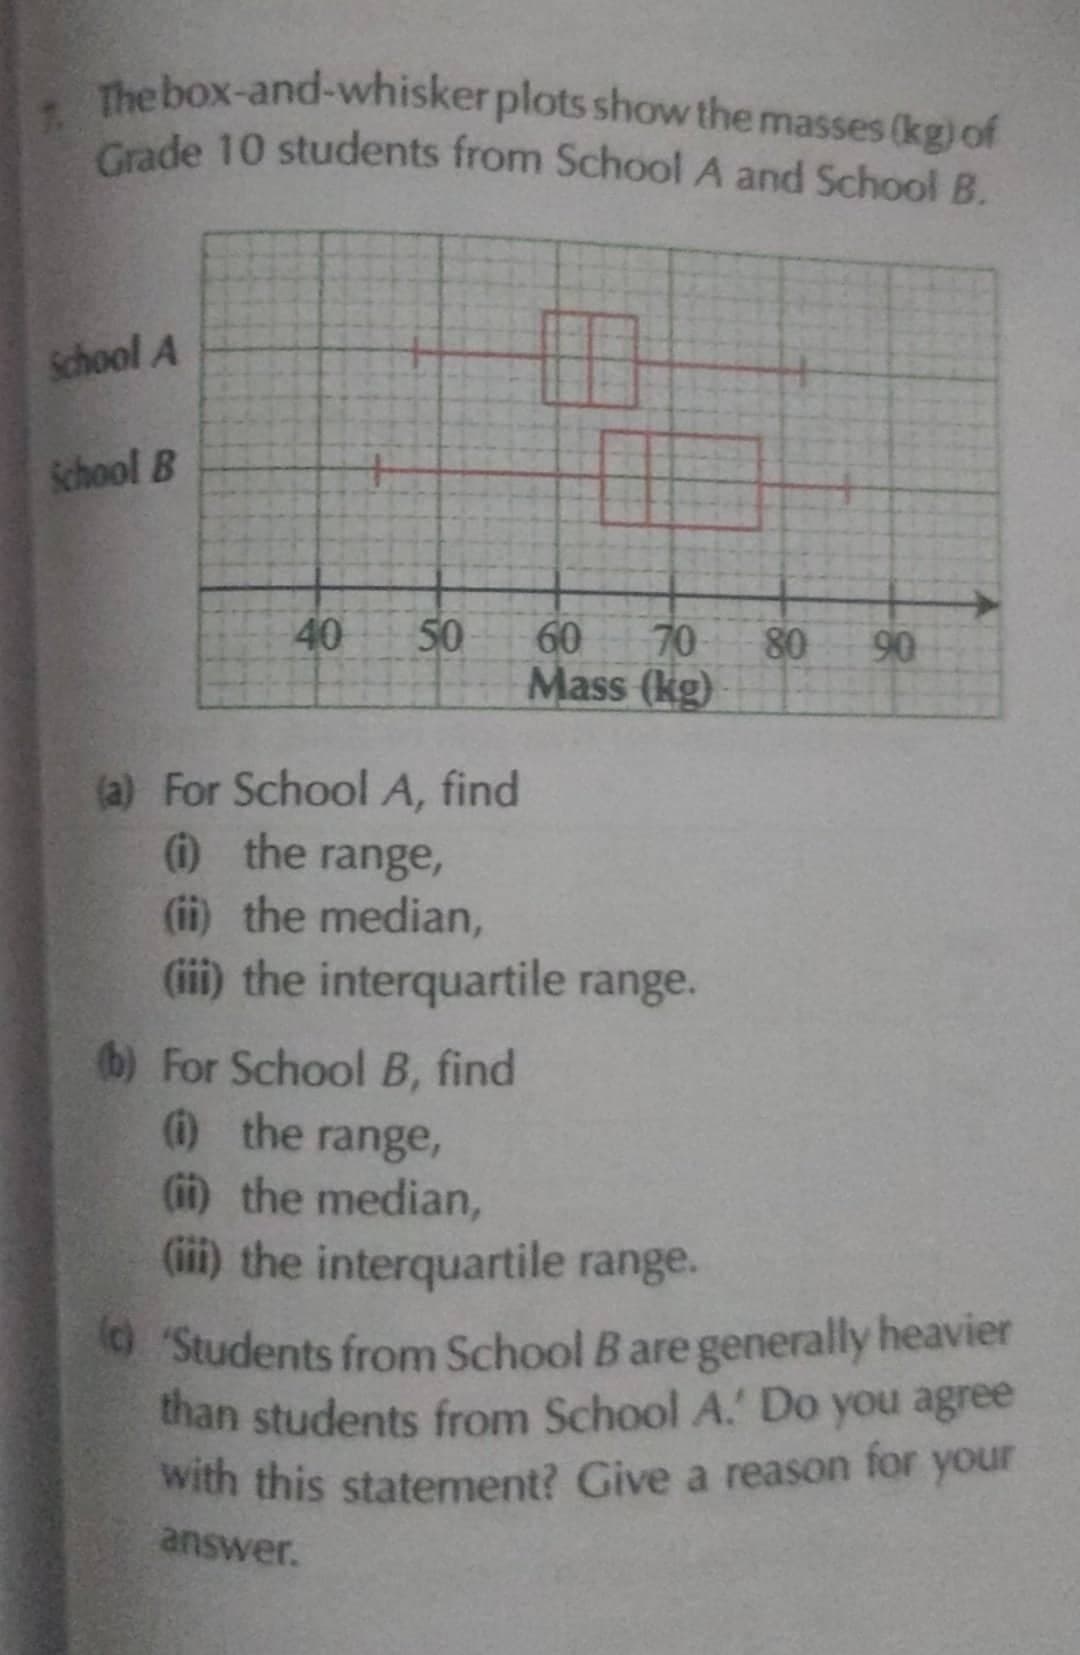 Grade 10 students from School A and School B.
The box-and-whisker plots show the masses (kg) of
Grade 10 students from School A and School B.
School A
School B
50
70
60
Mass (kg)
80
90
(a) For School A, find
1 the range,
(ii) the median,
(iii) the interquartile range.
(b) For School B, find
) the range,
(ii) the median,
(iii) the interquartile range.
OStudents from School B are generally heavier
than students from School A. Do you agree
with this statement? Give a reason for your
answer.
40
